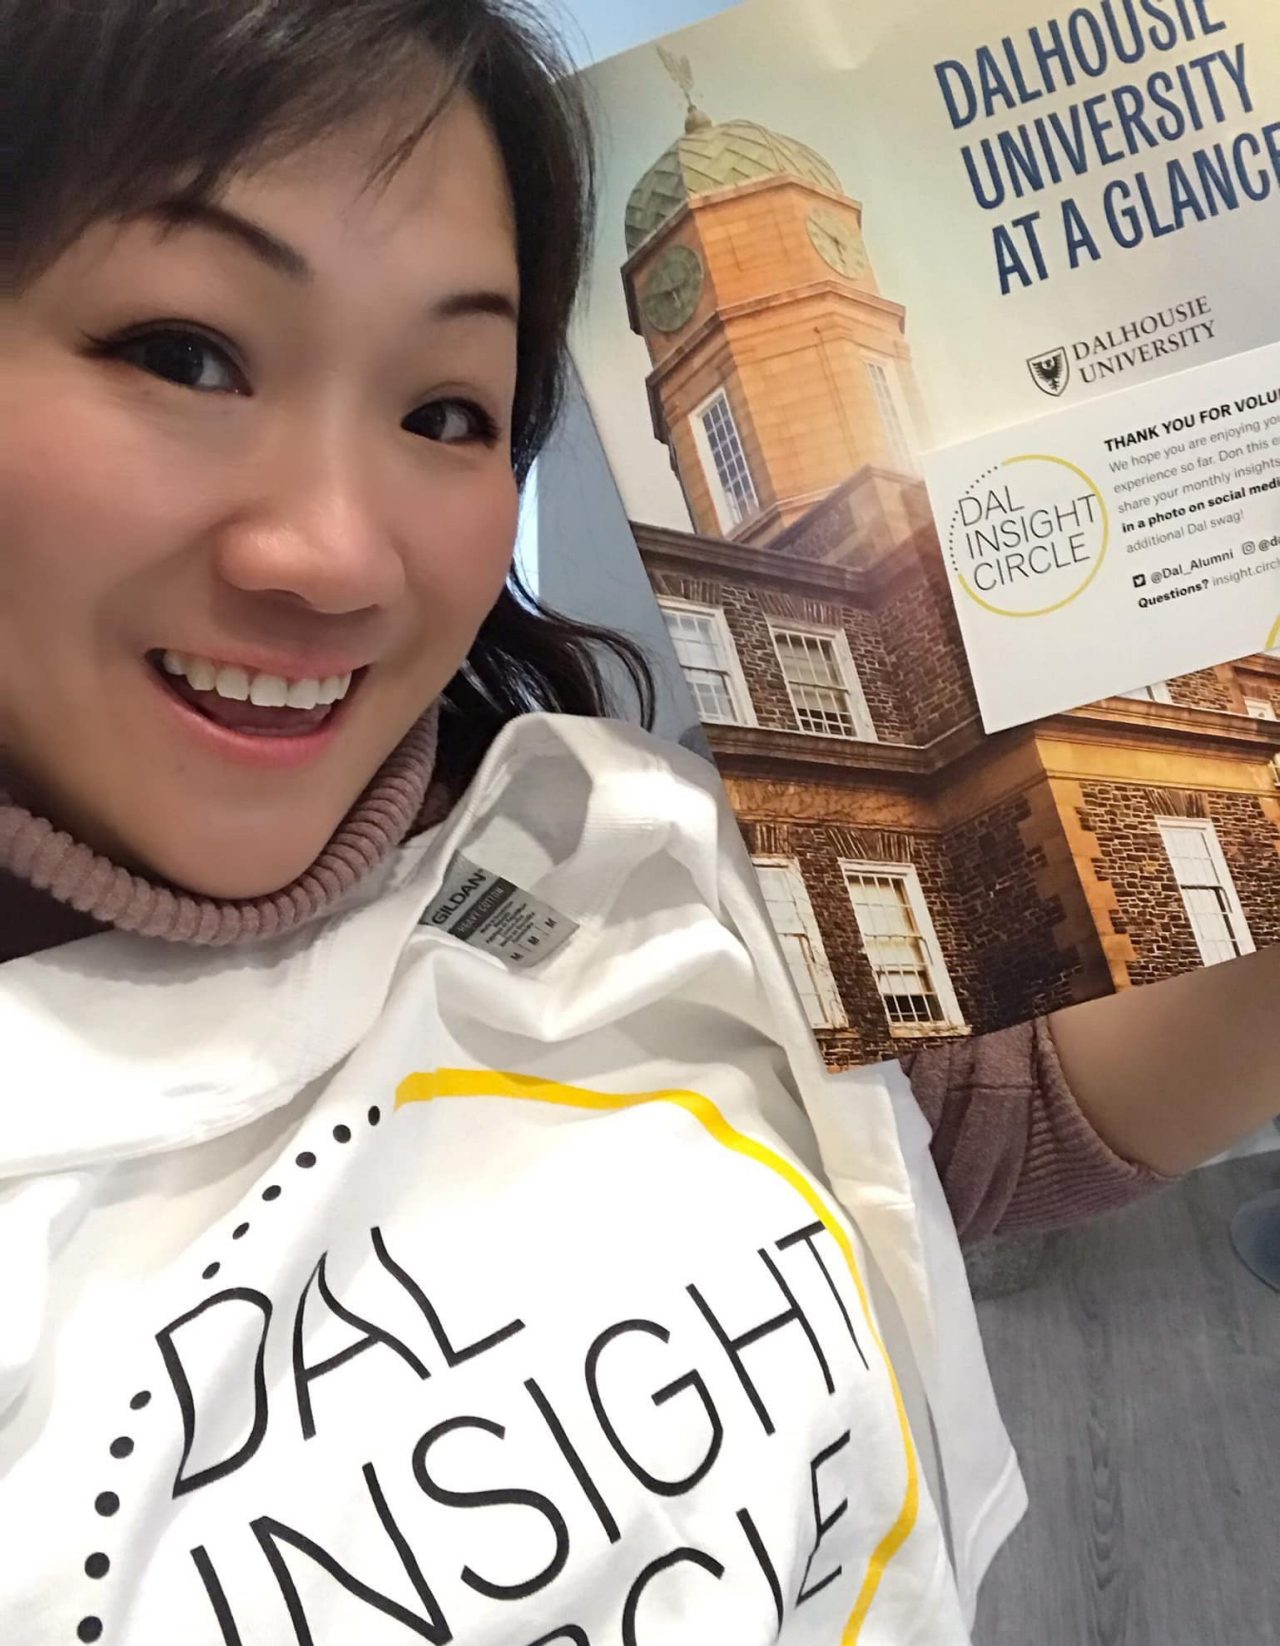 Choi-Cheung smiling with Dal Insight Circle t-shirt and pamphlet.